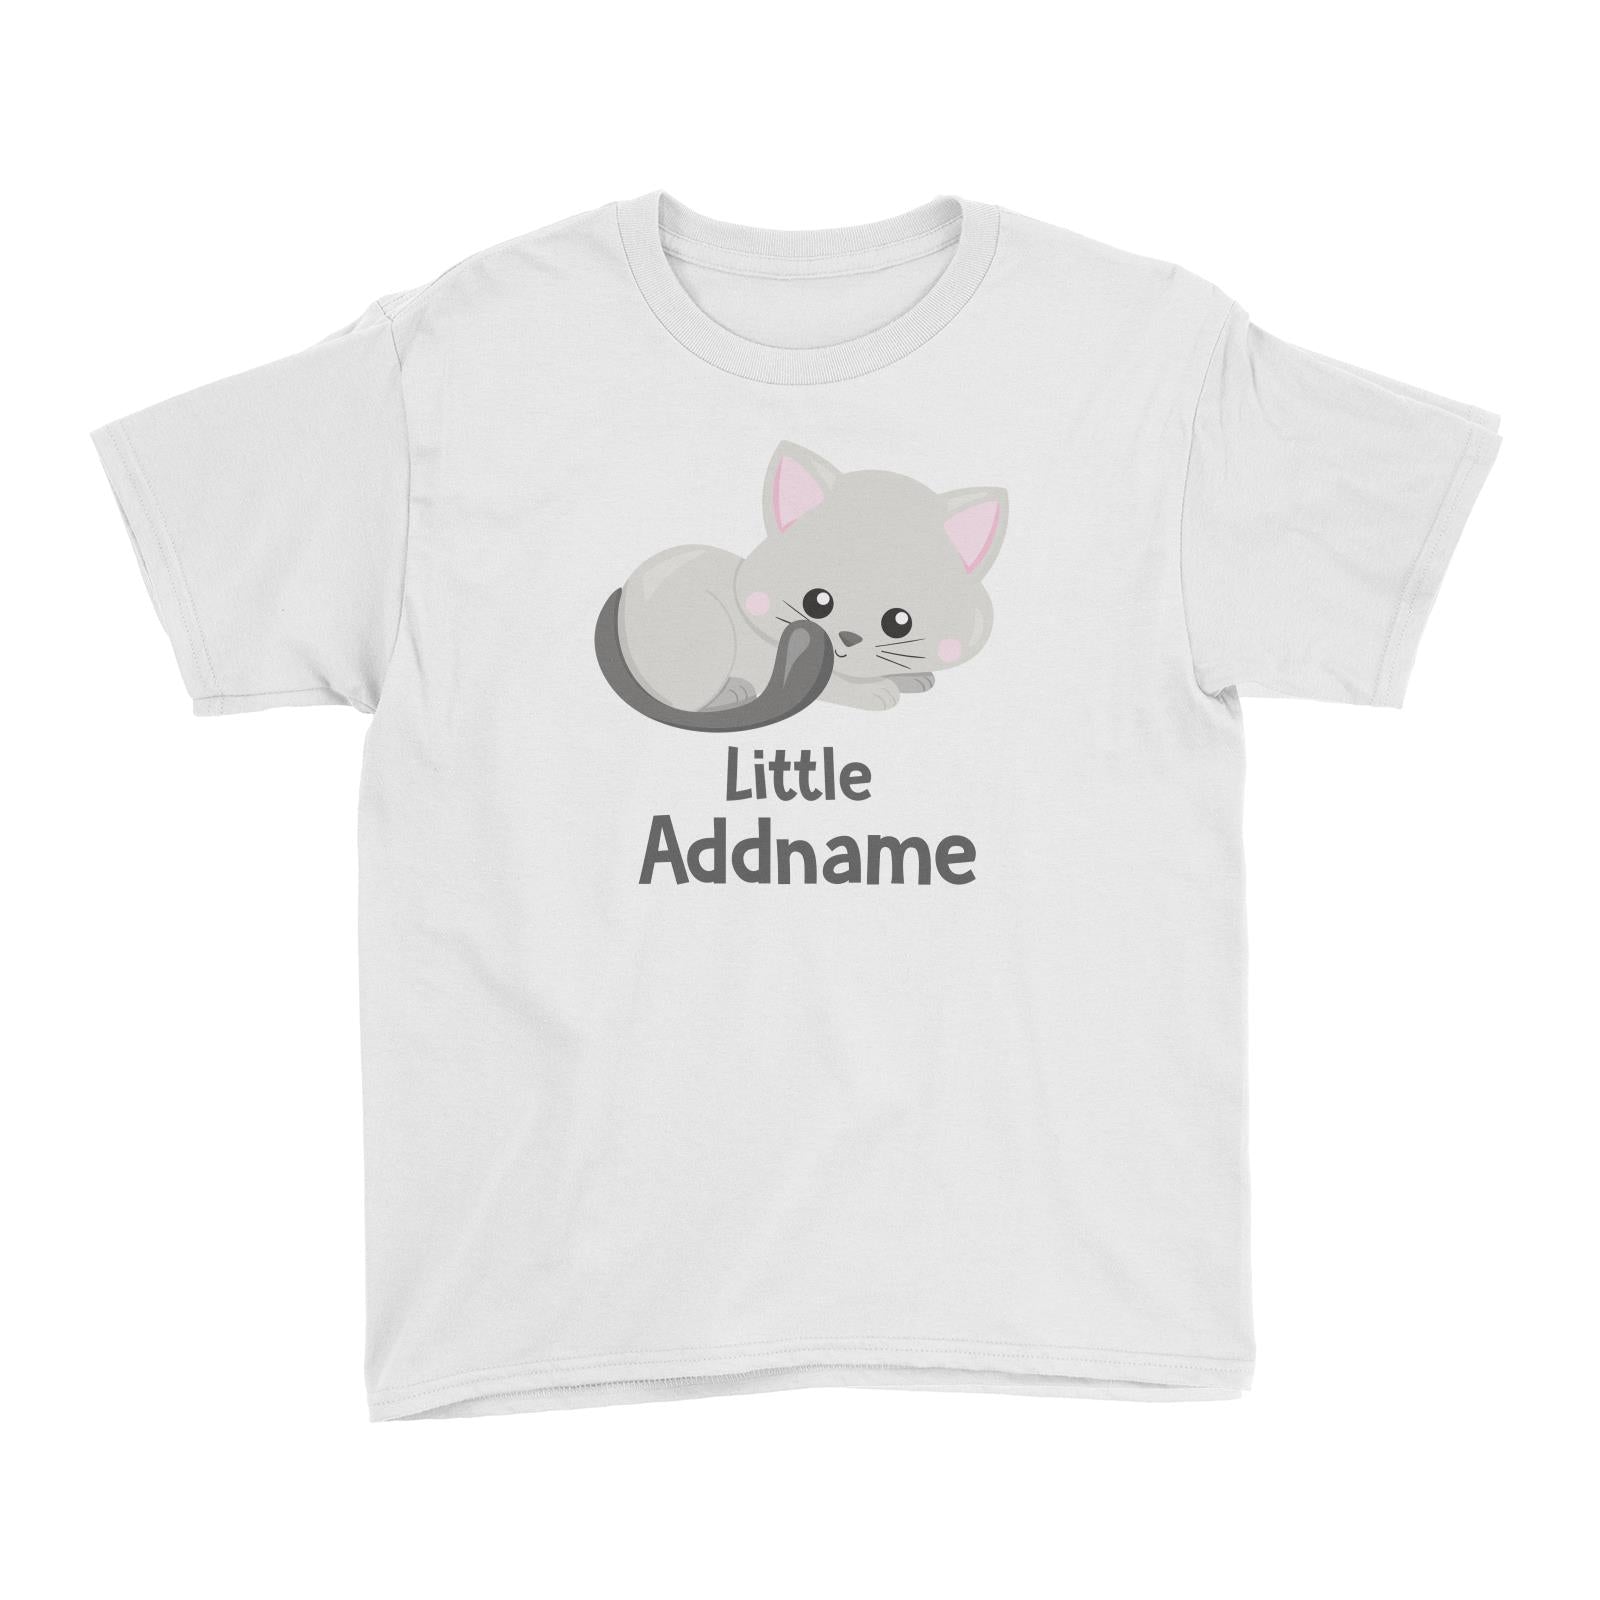 Adorable Cats Grey Cat Little Addname Kid's T-Shirt